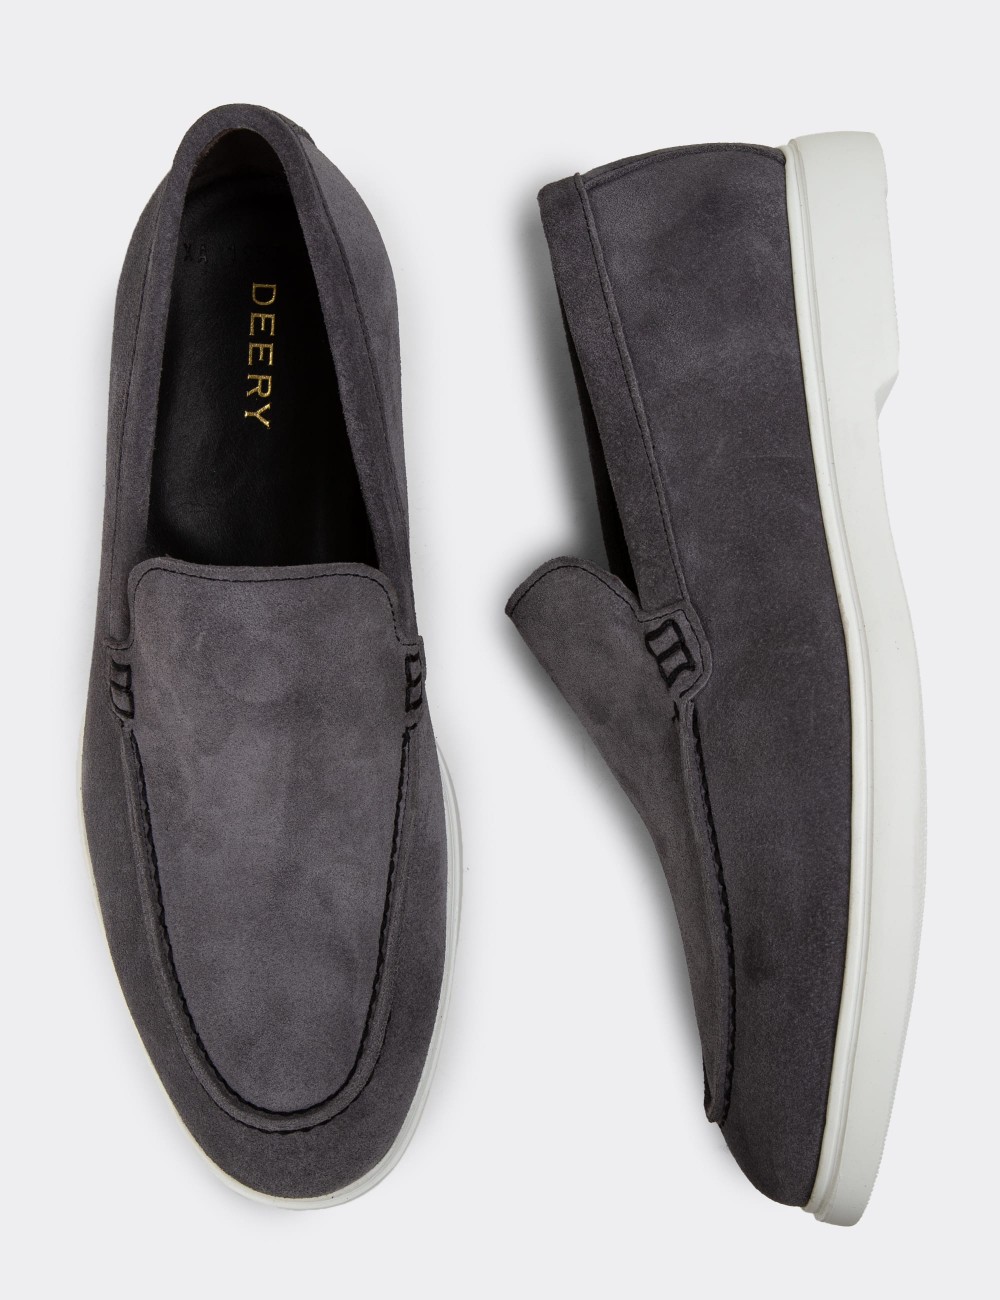 Gray Suede Leather Loafers - 01957MGRIE01